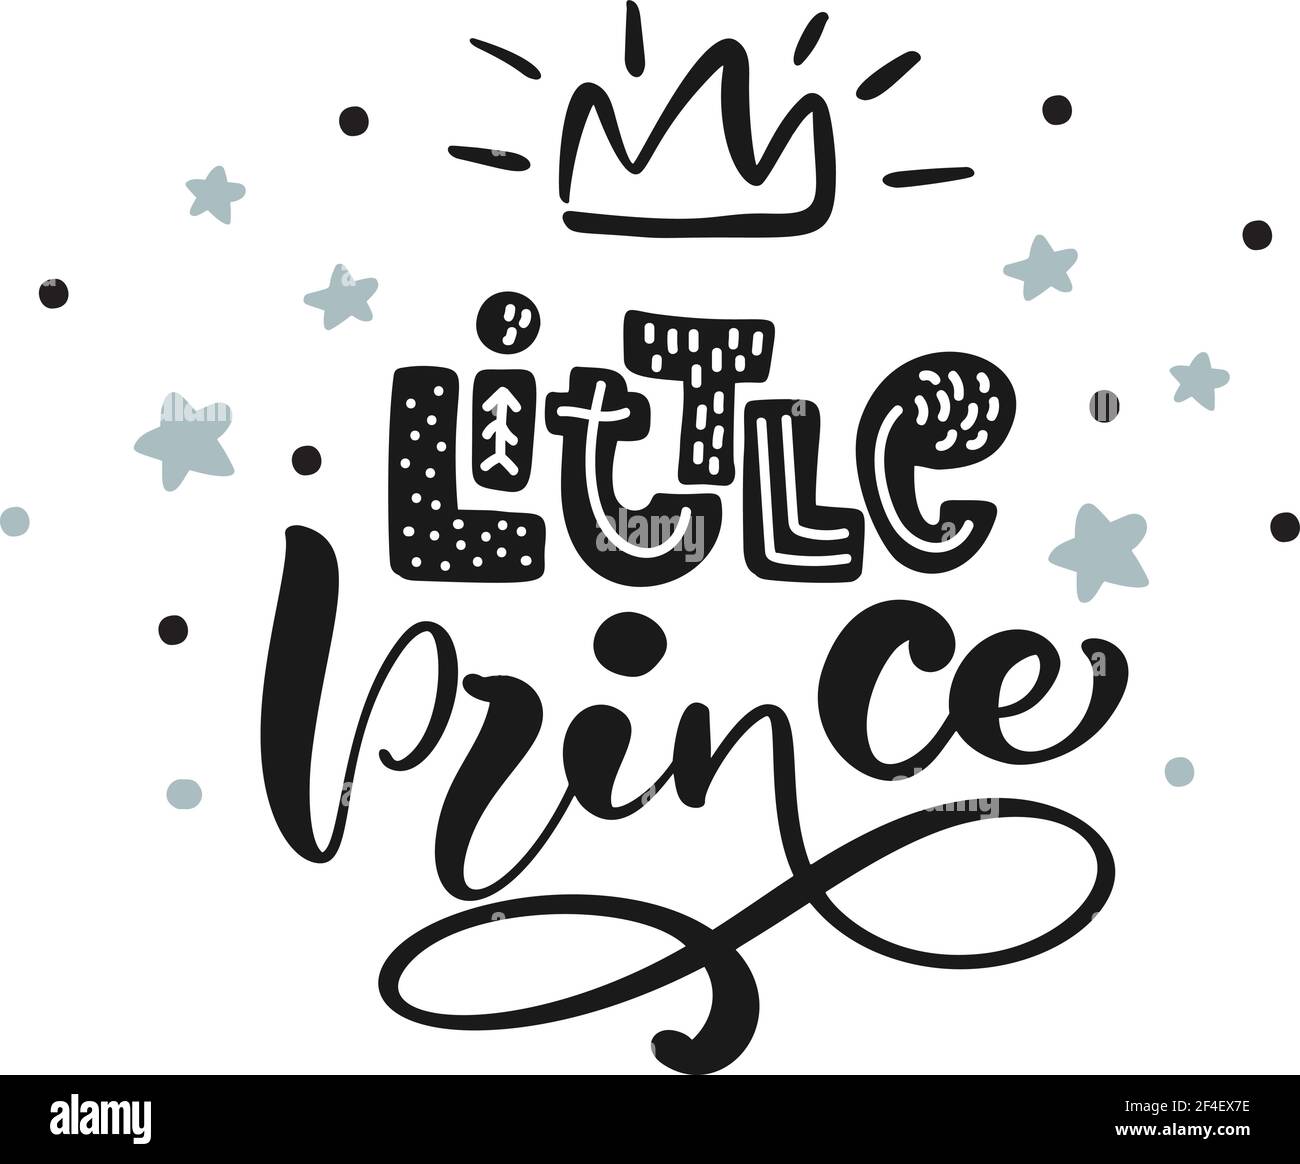 Little prince quote calligraphy lettering hand drawn scandinavian phrase illustration with crown and stars. Blue and black decorative background Stock Vector